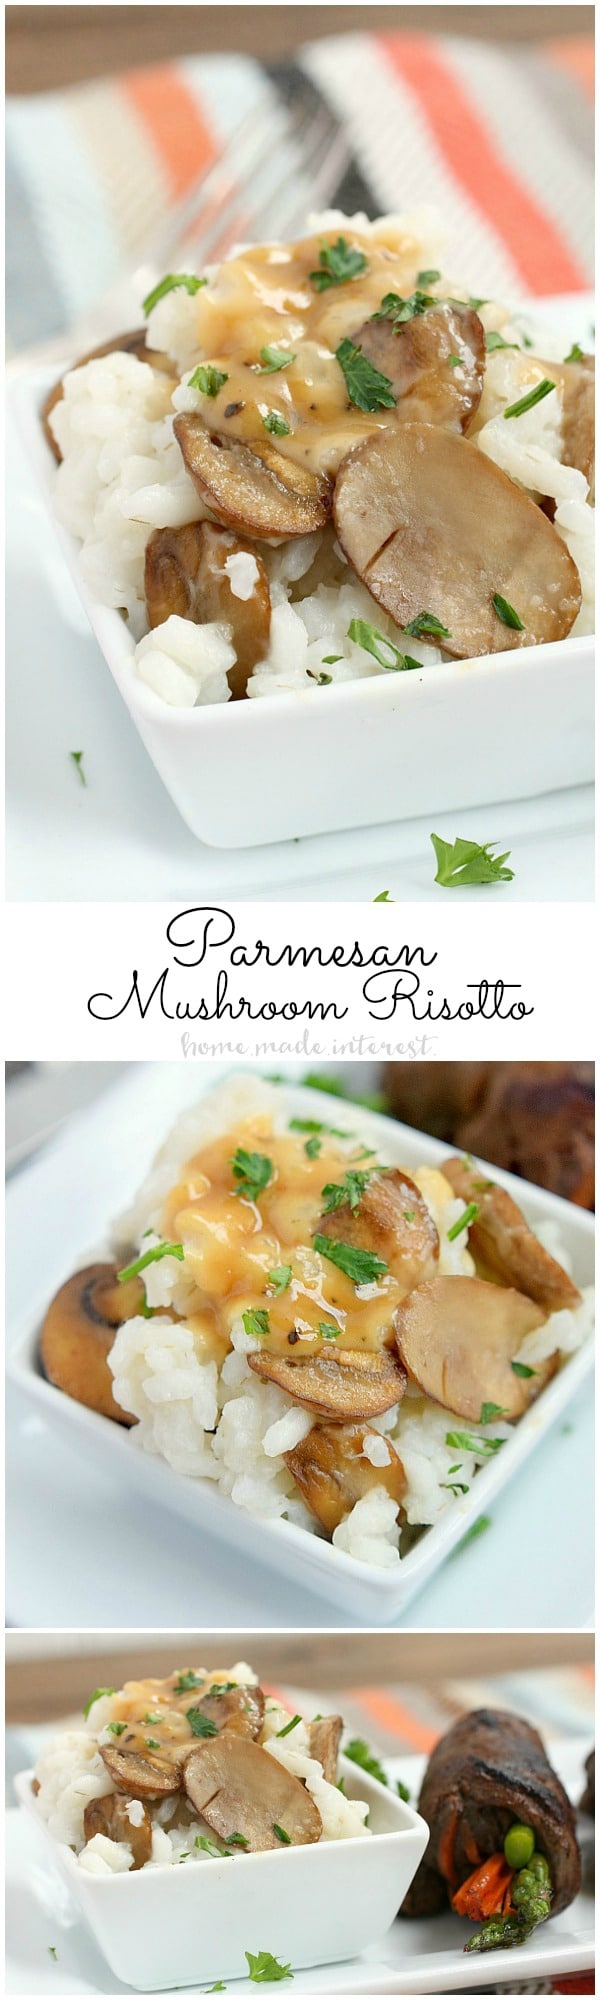 This creamy parmesan mushroom risotto is made with cheesy arborio rice and a creamy white wine mushroom sauce. This is a great side dish or dinner recipe for a romantic meal.